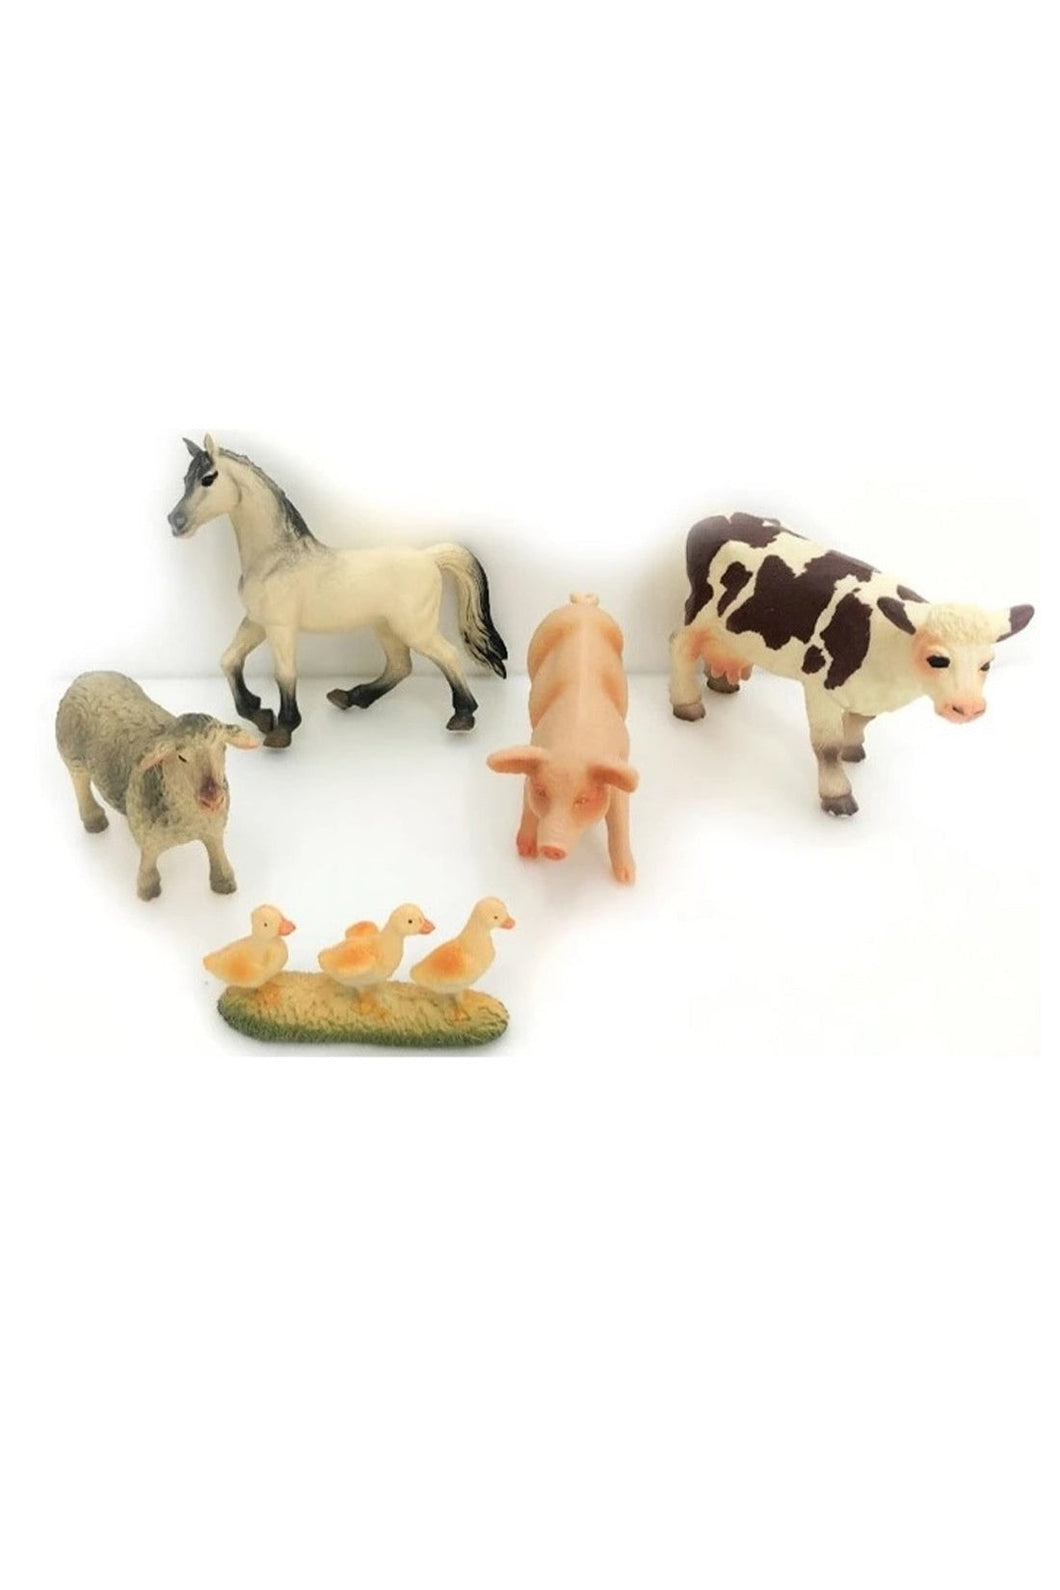 Early Learning Centre Farm Animals X 5 Box